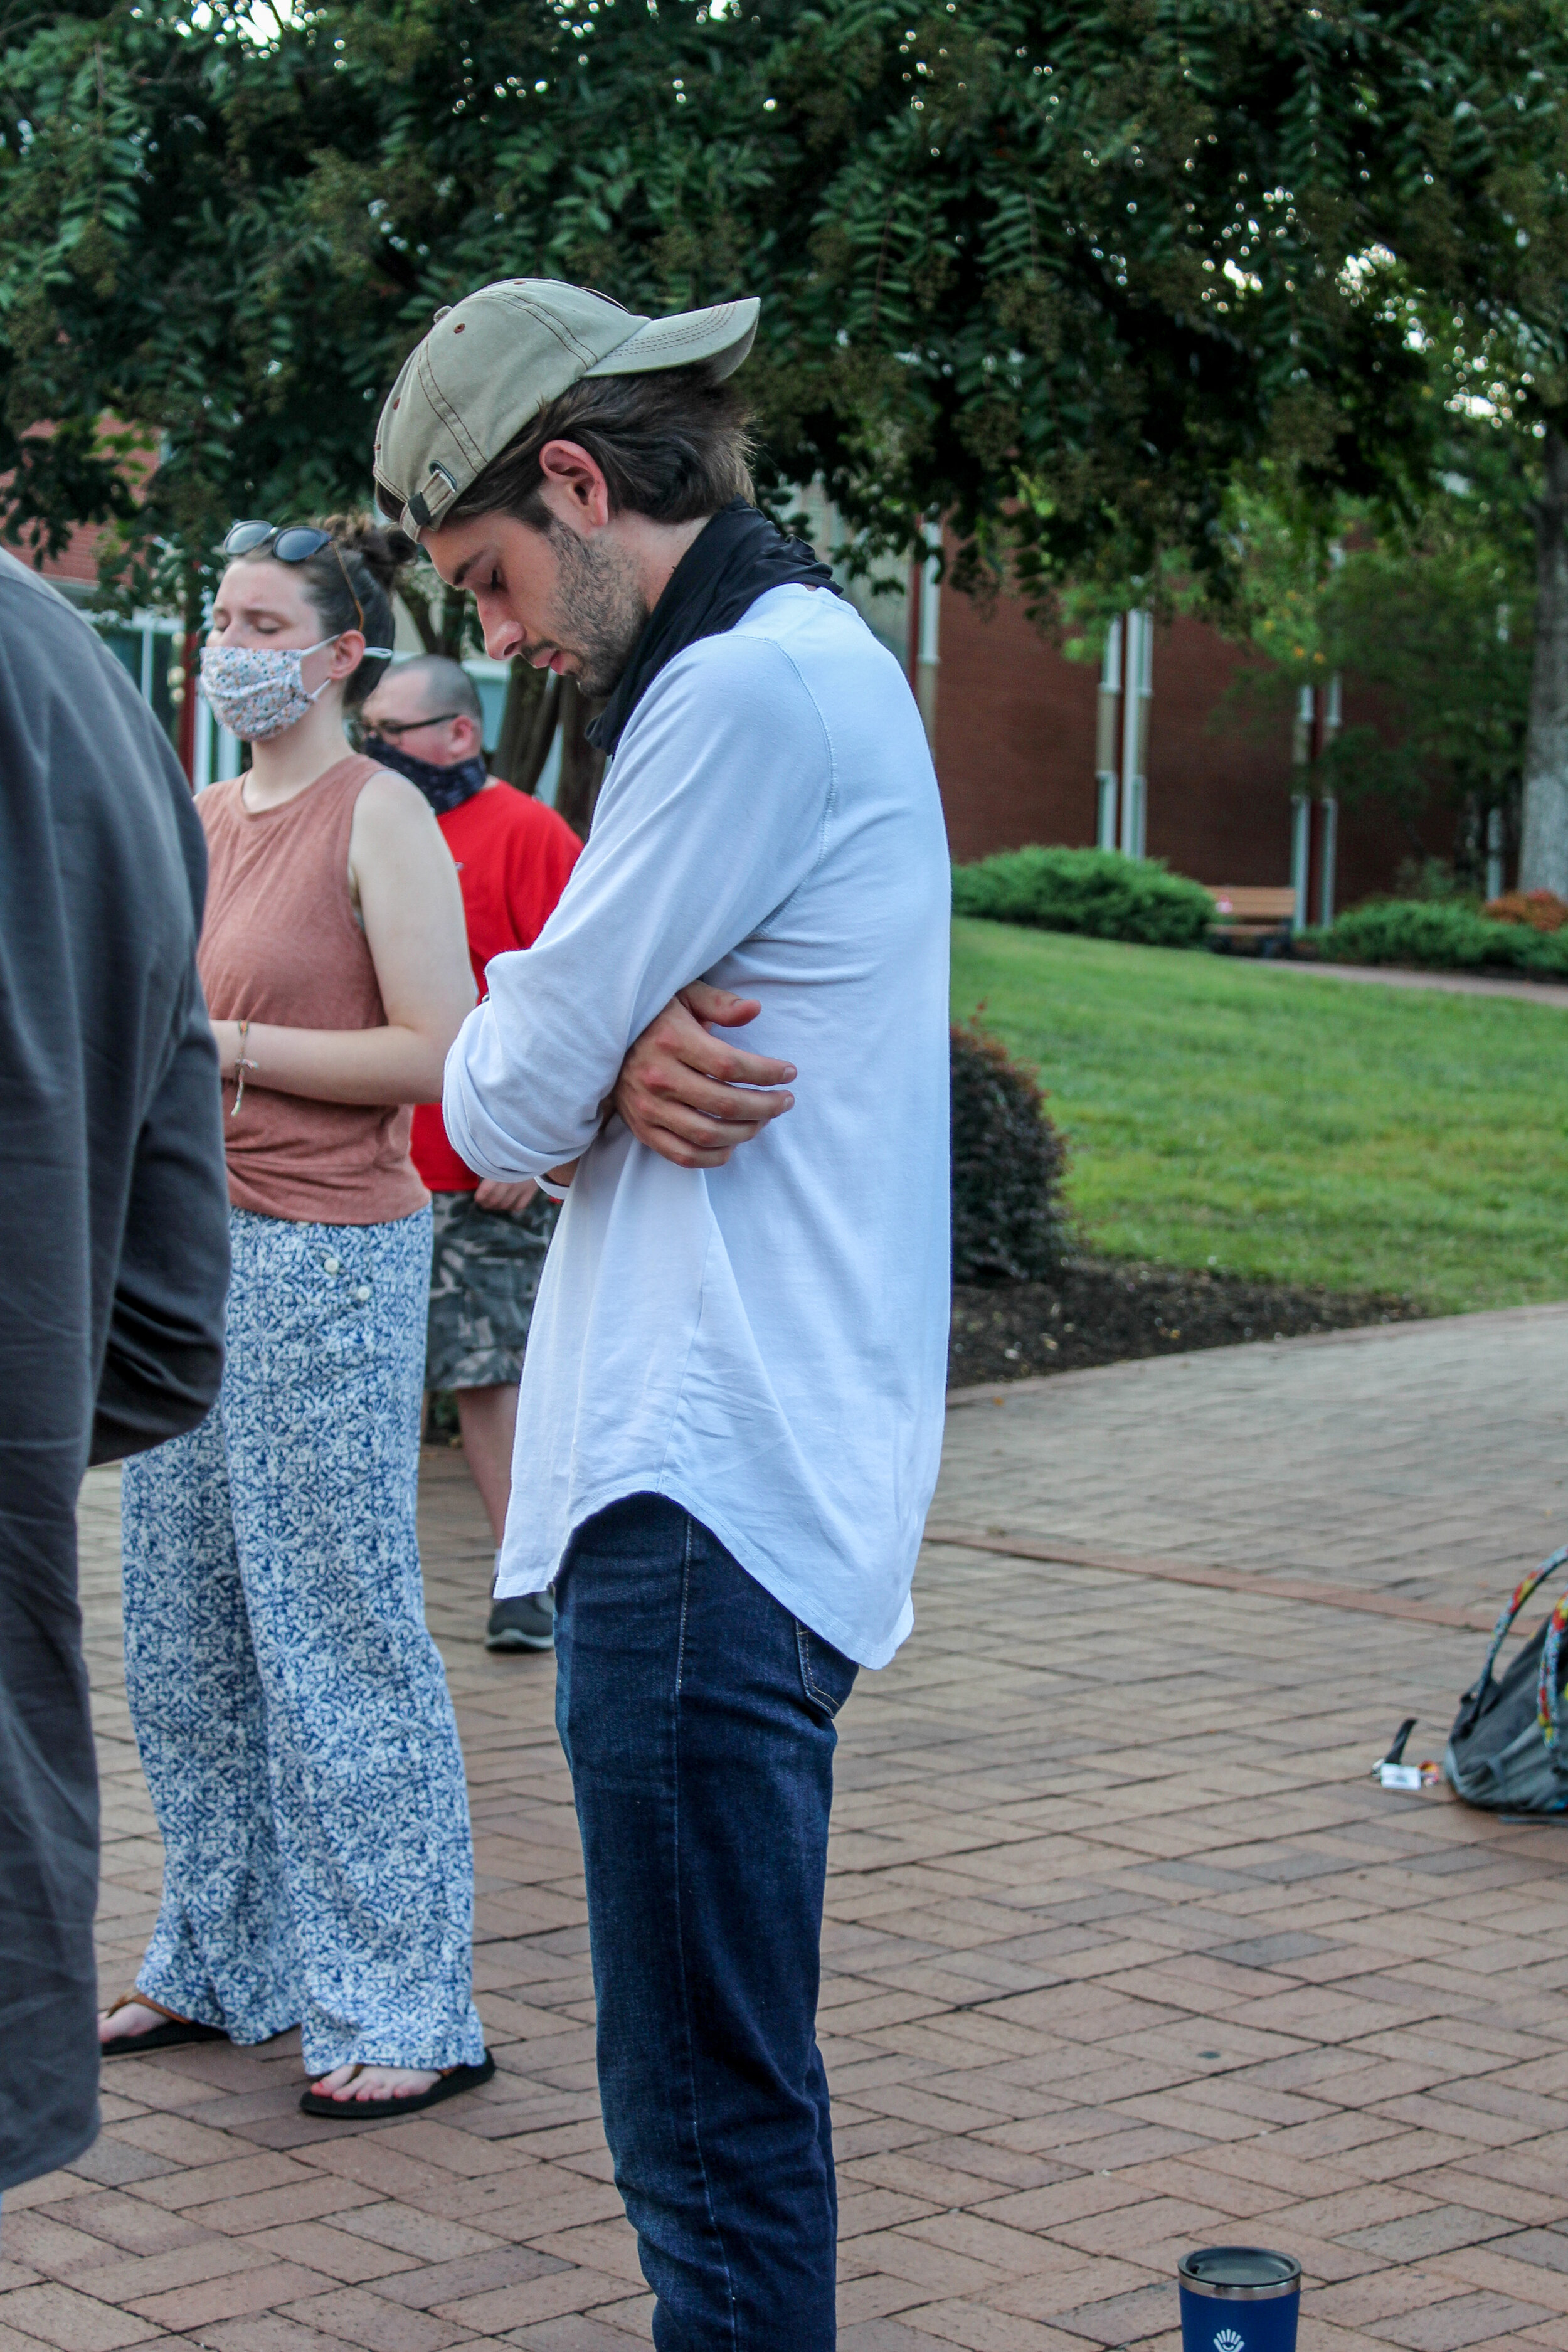 Austin Erhardt, Christian studies major, bowed in prayer. Austin leads the prayer team for BCM Leadership, and thus organizes and leads this pre-service gathering every Thursday.